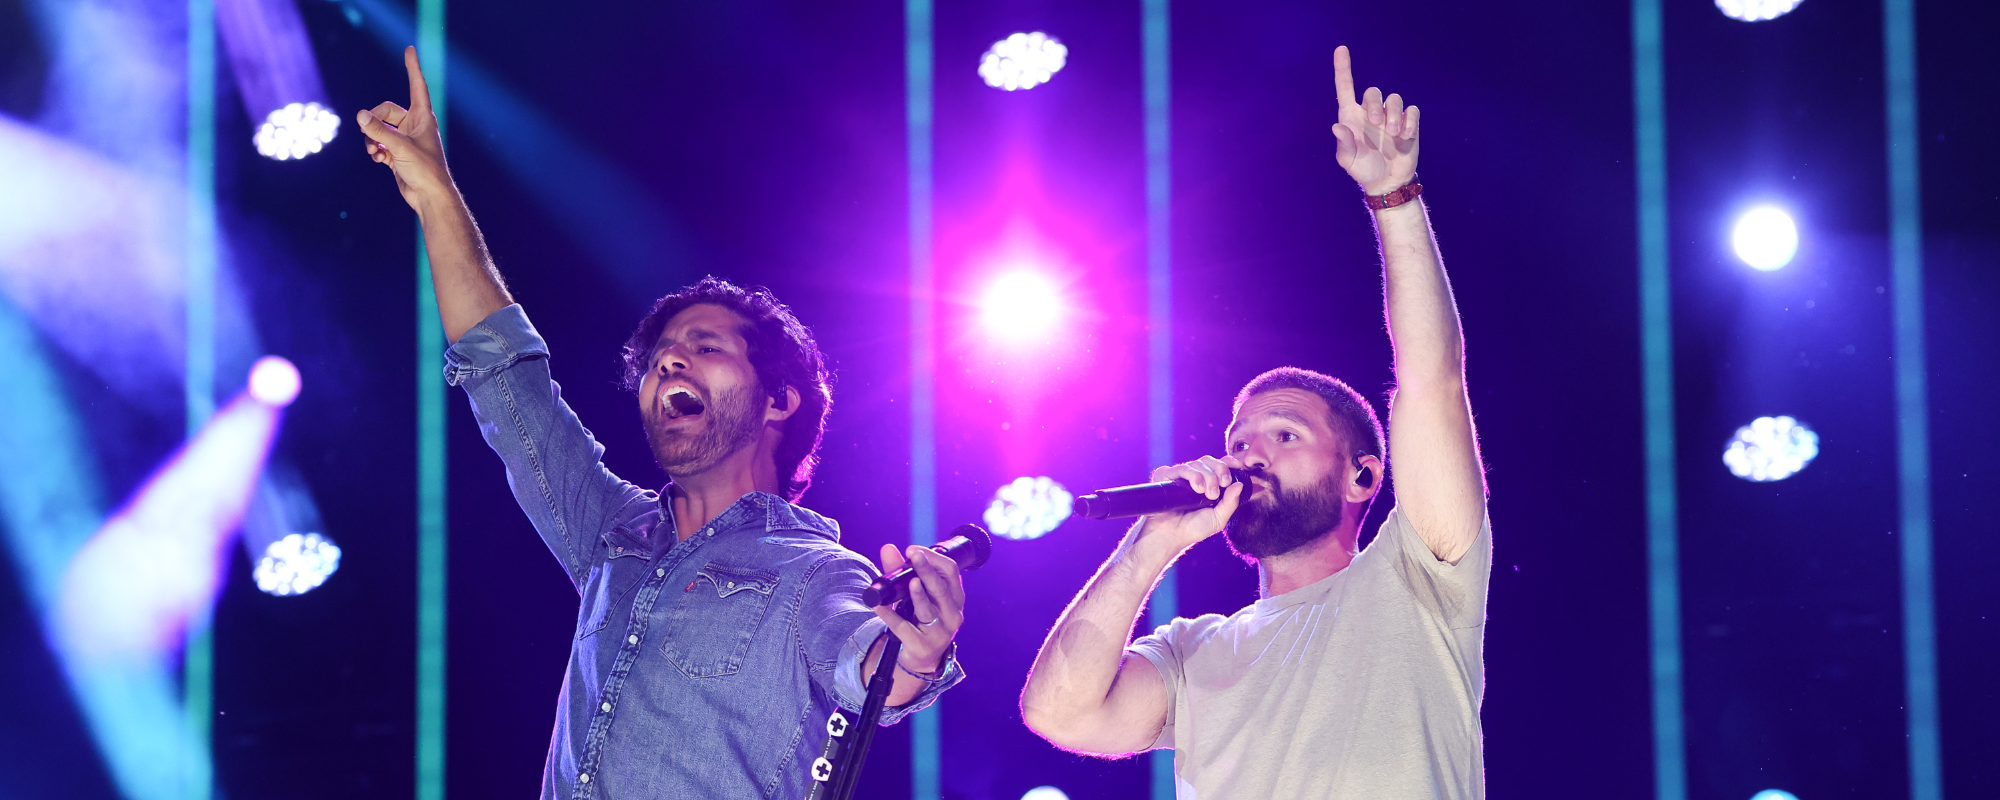 Future Coaches Dan + Shay Perform “Bigger Houses” on ‘The Voice’ Season 24 Finale